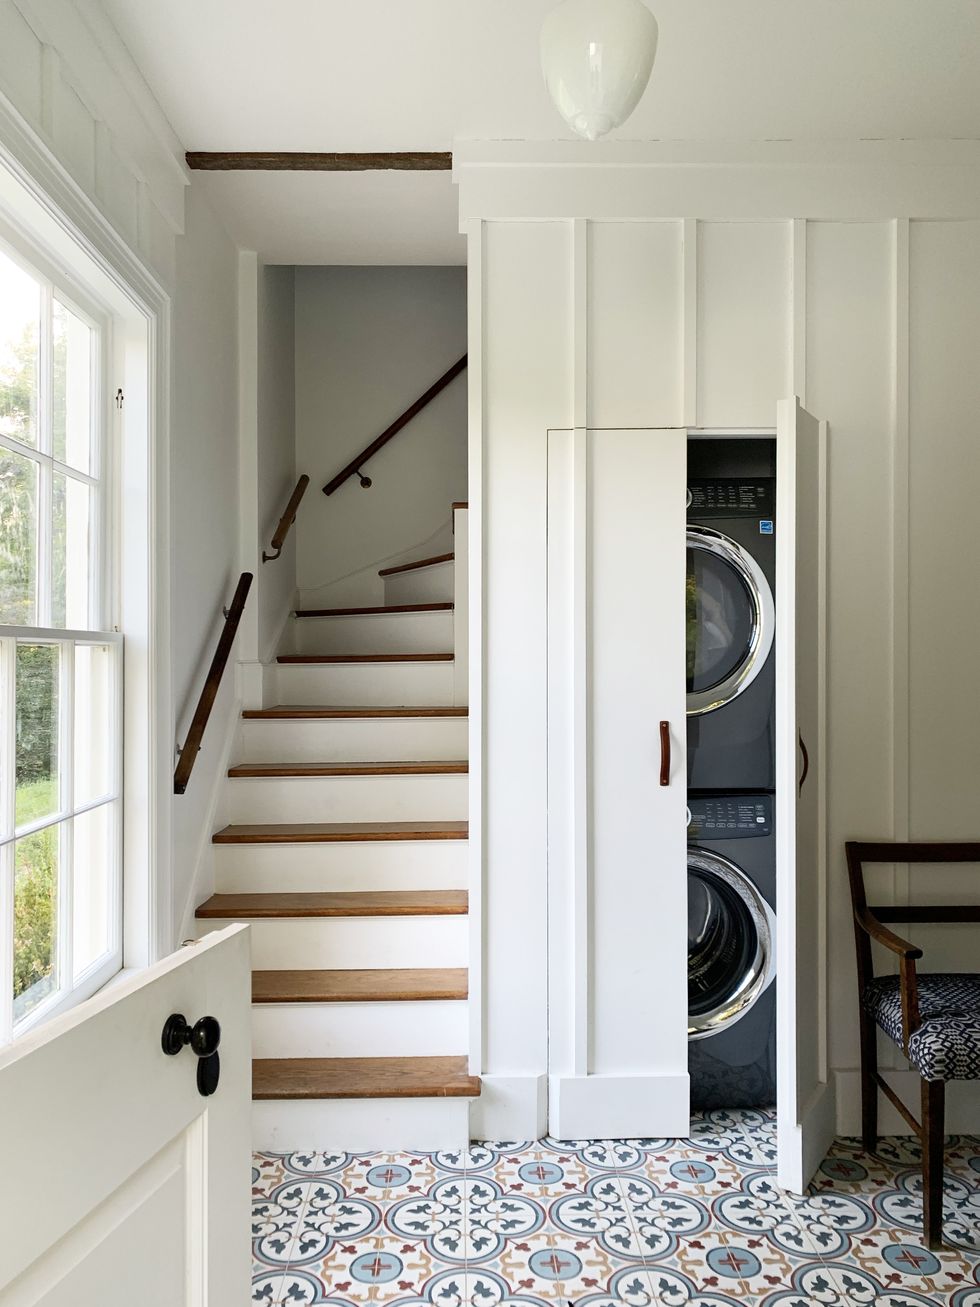 14 Best Laundry Room Ideas - How to Organize Your Landry Room